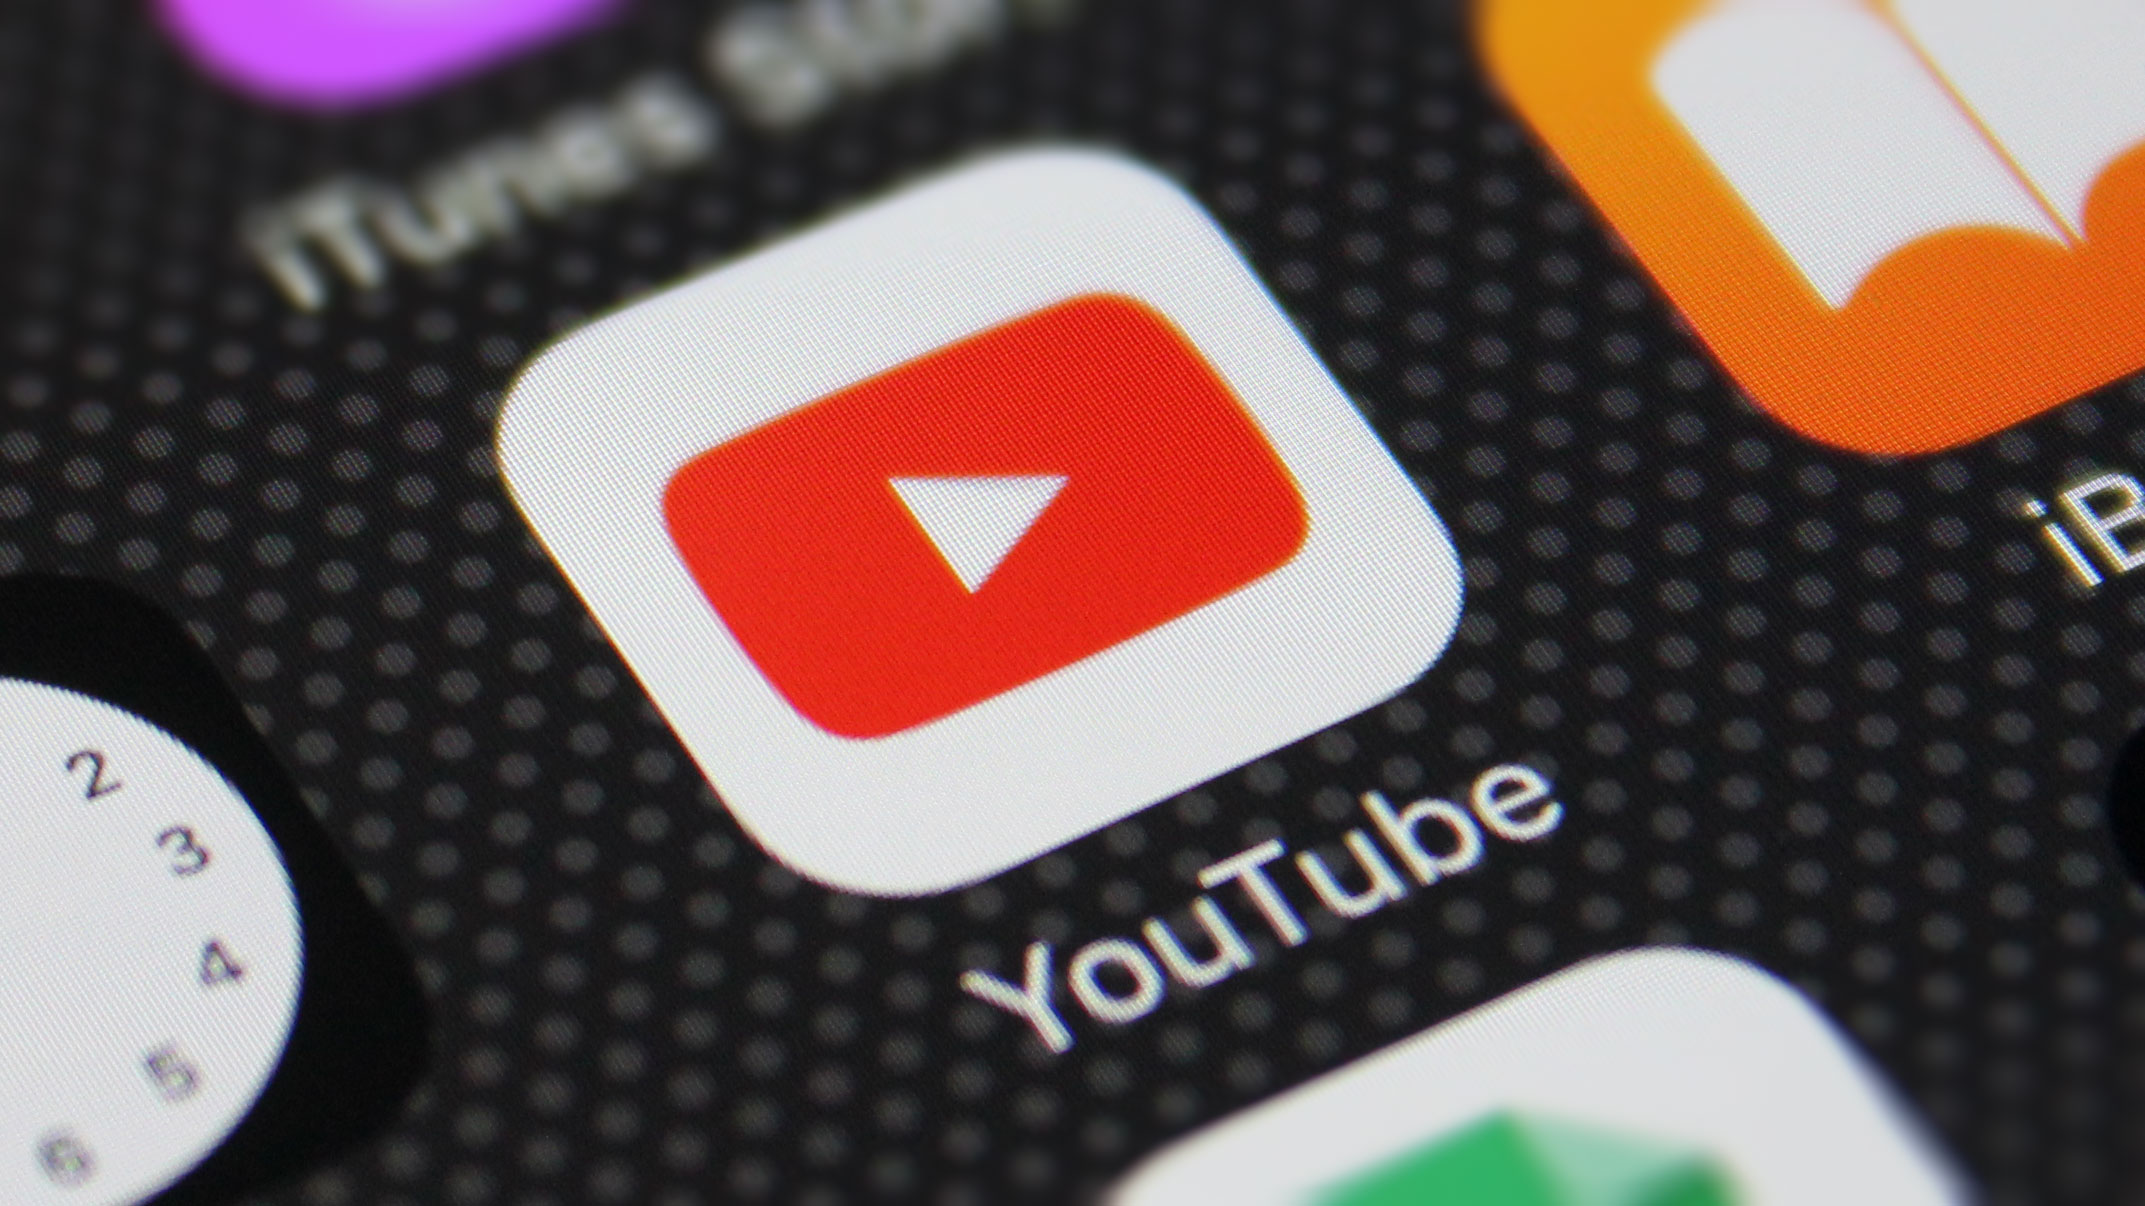 YouTube’s battery drain problem on iOS devices is now fixed